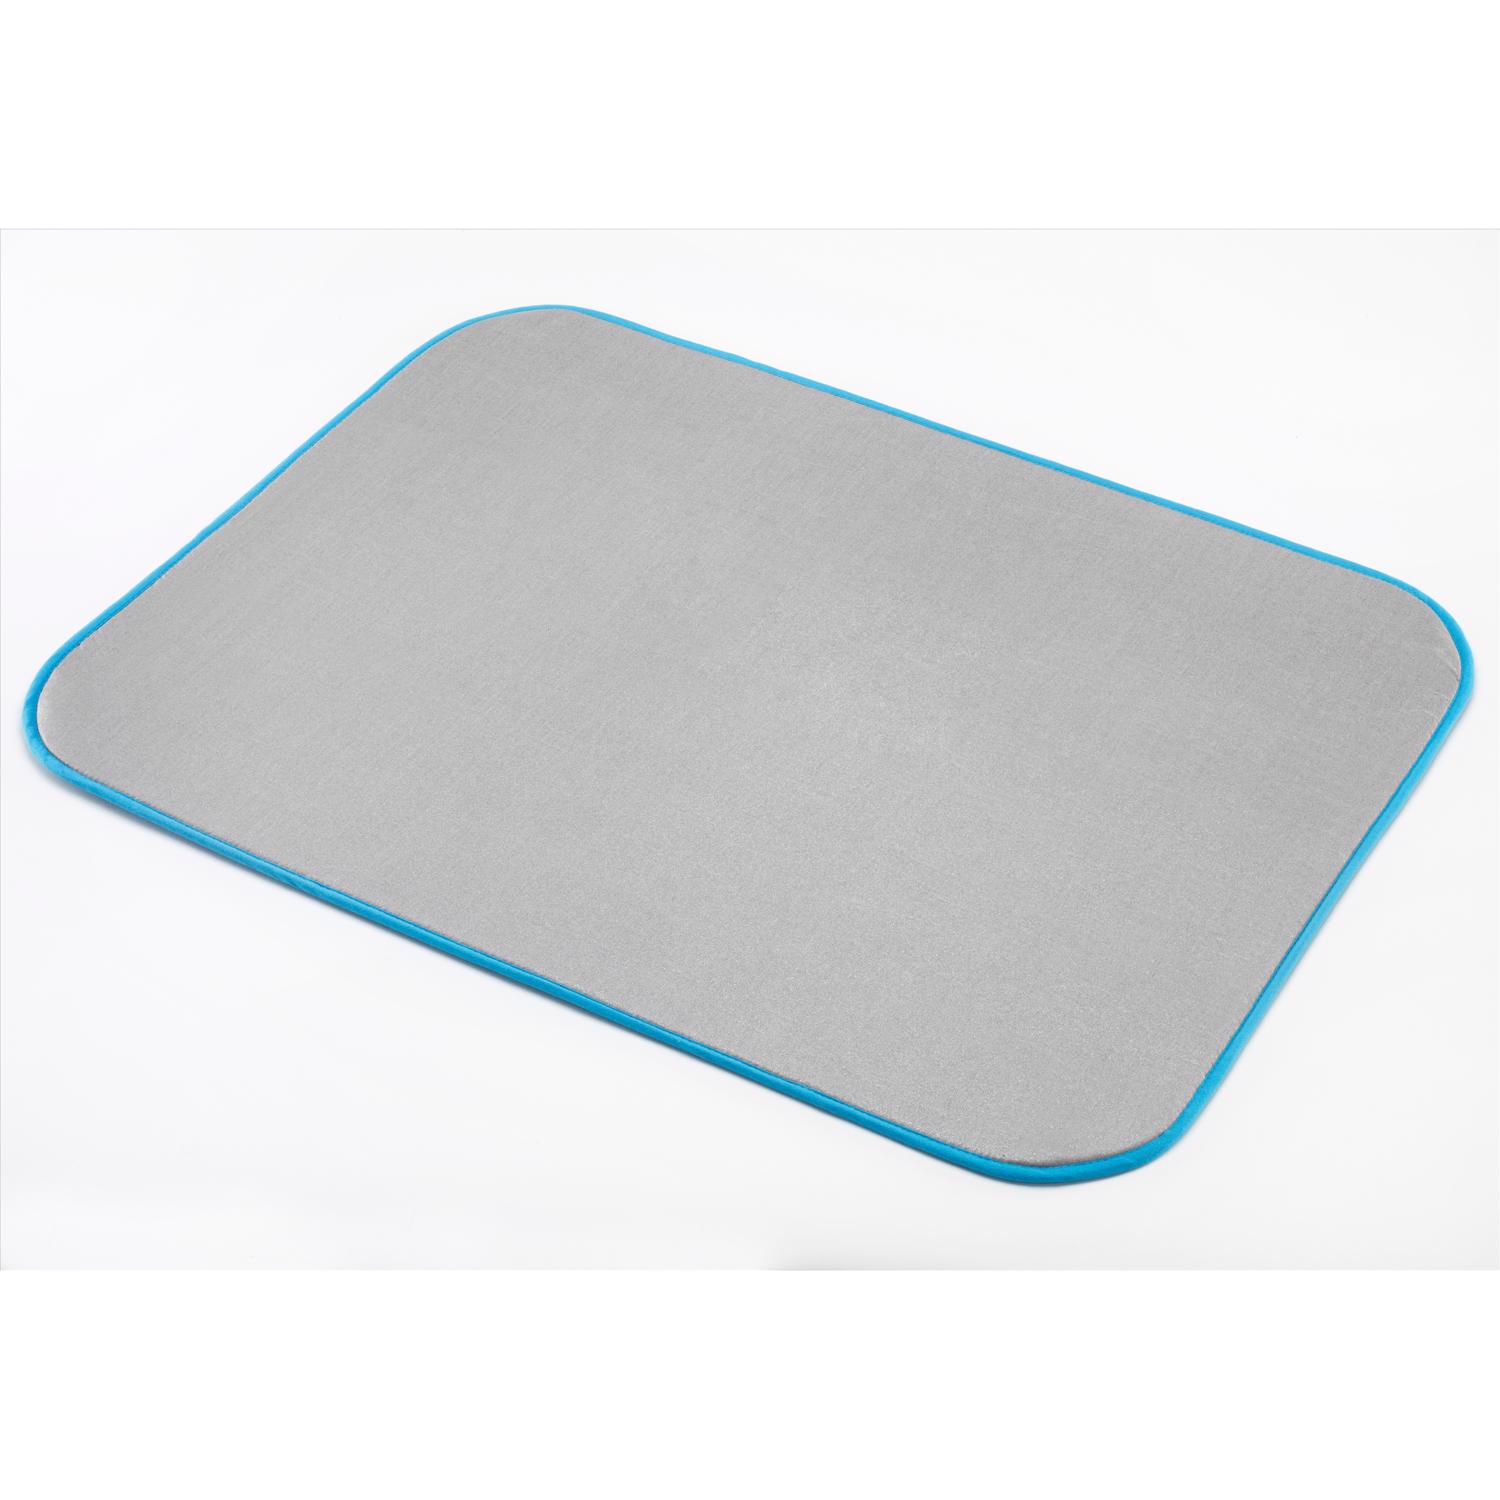 Photos - Ironing Accessory Whitmor 10.5 in. H X 7.5 in. W X 1.9 in. L Ironing Pad Pad Included 6154-6